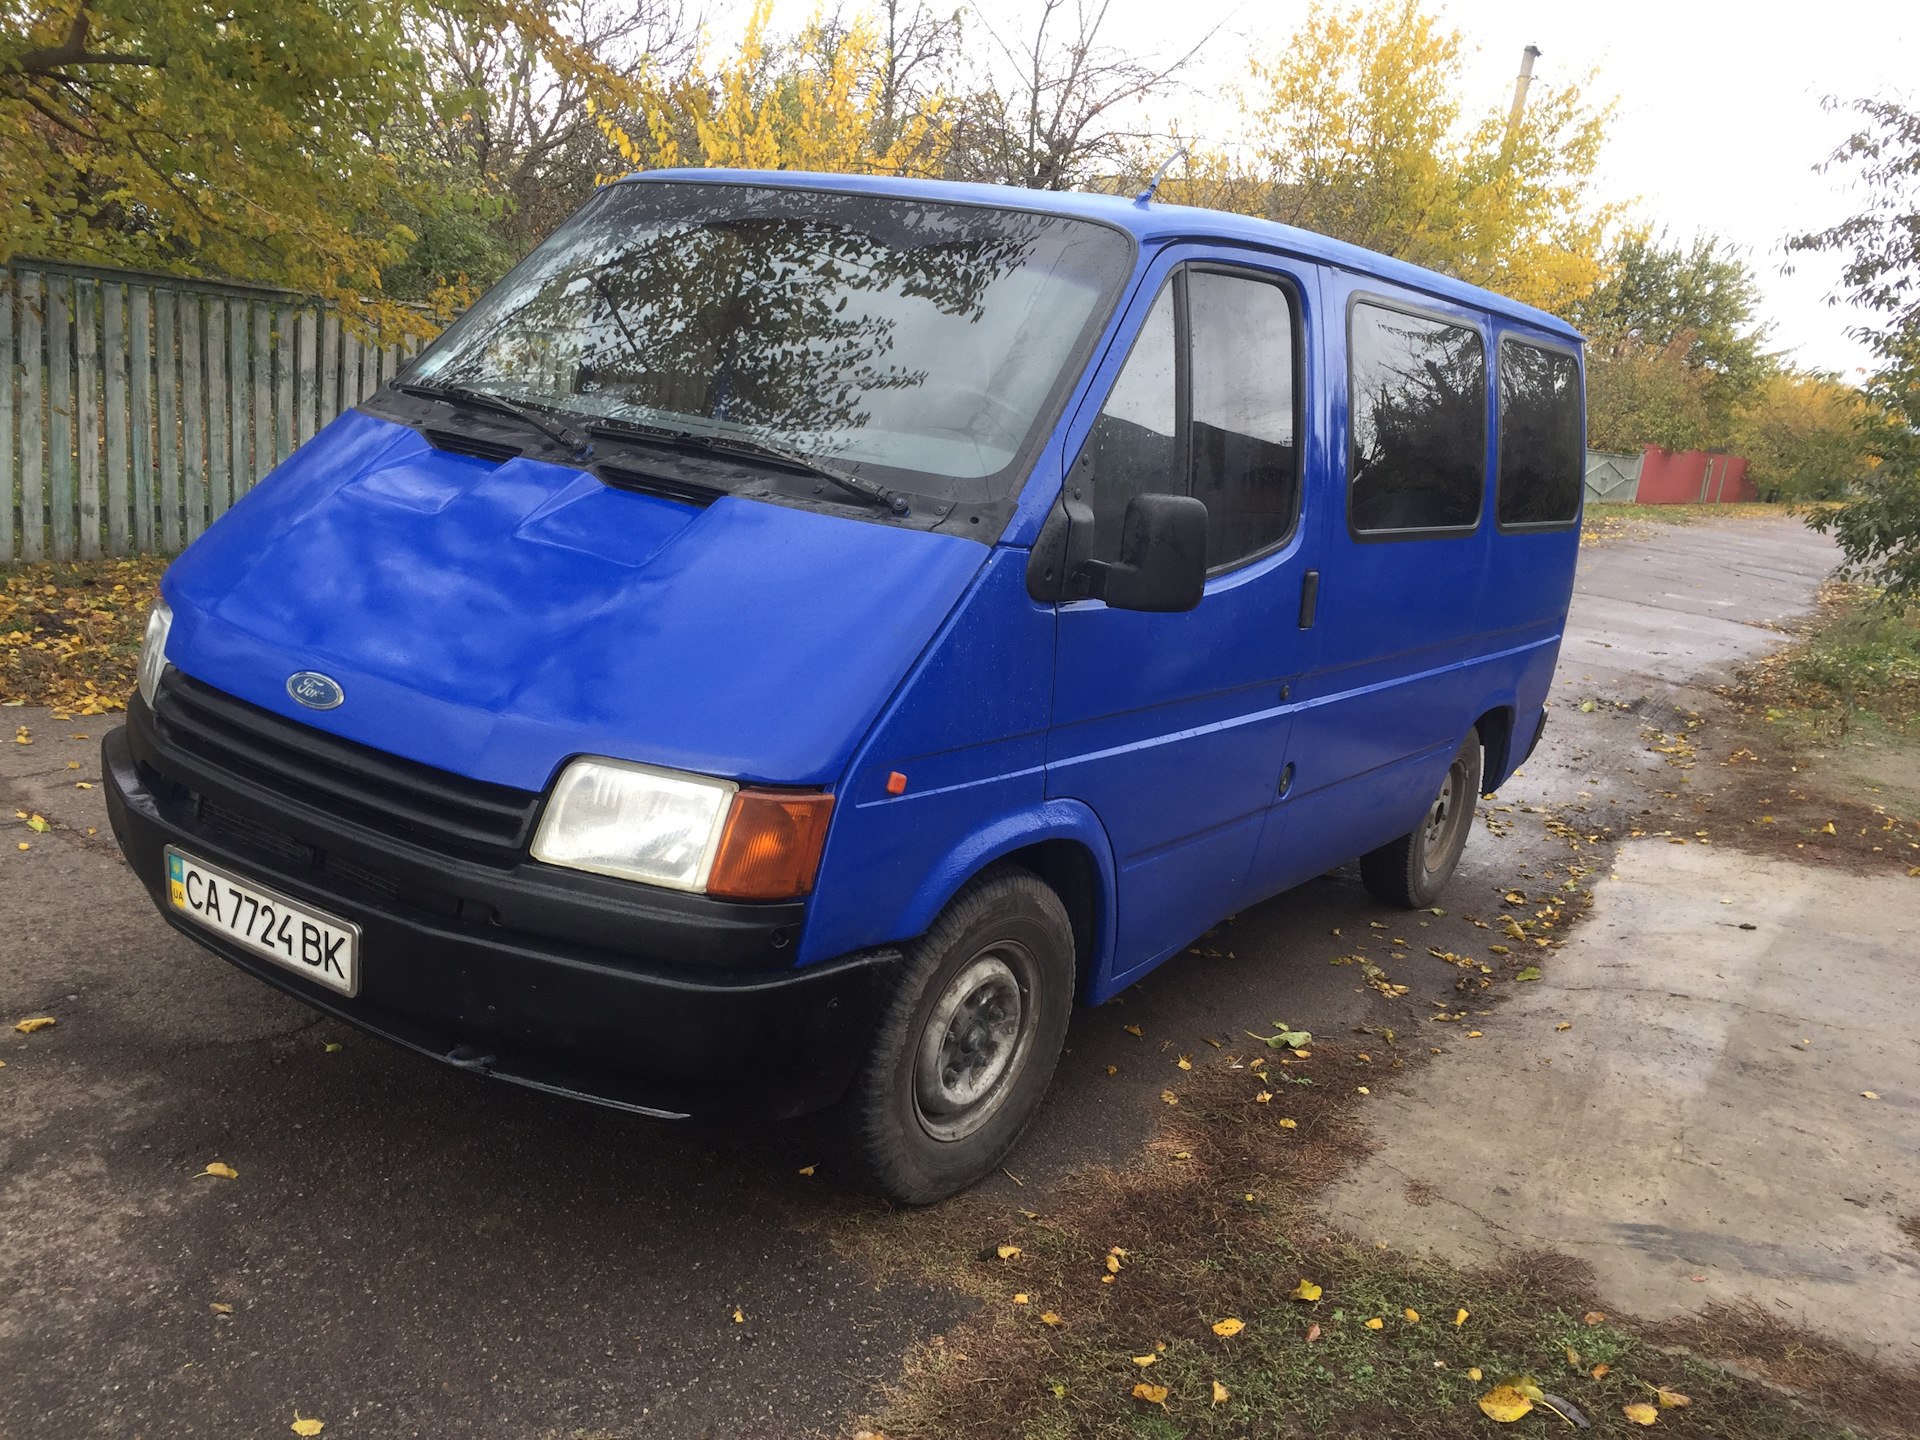 Форд транзит 1990. Ford Transit 1990. Ford Transit 1990 2.5. Форд Транзит 2005 2.5 дизель. Форд Транзит 2005 2.4 дизель.